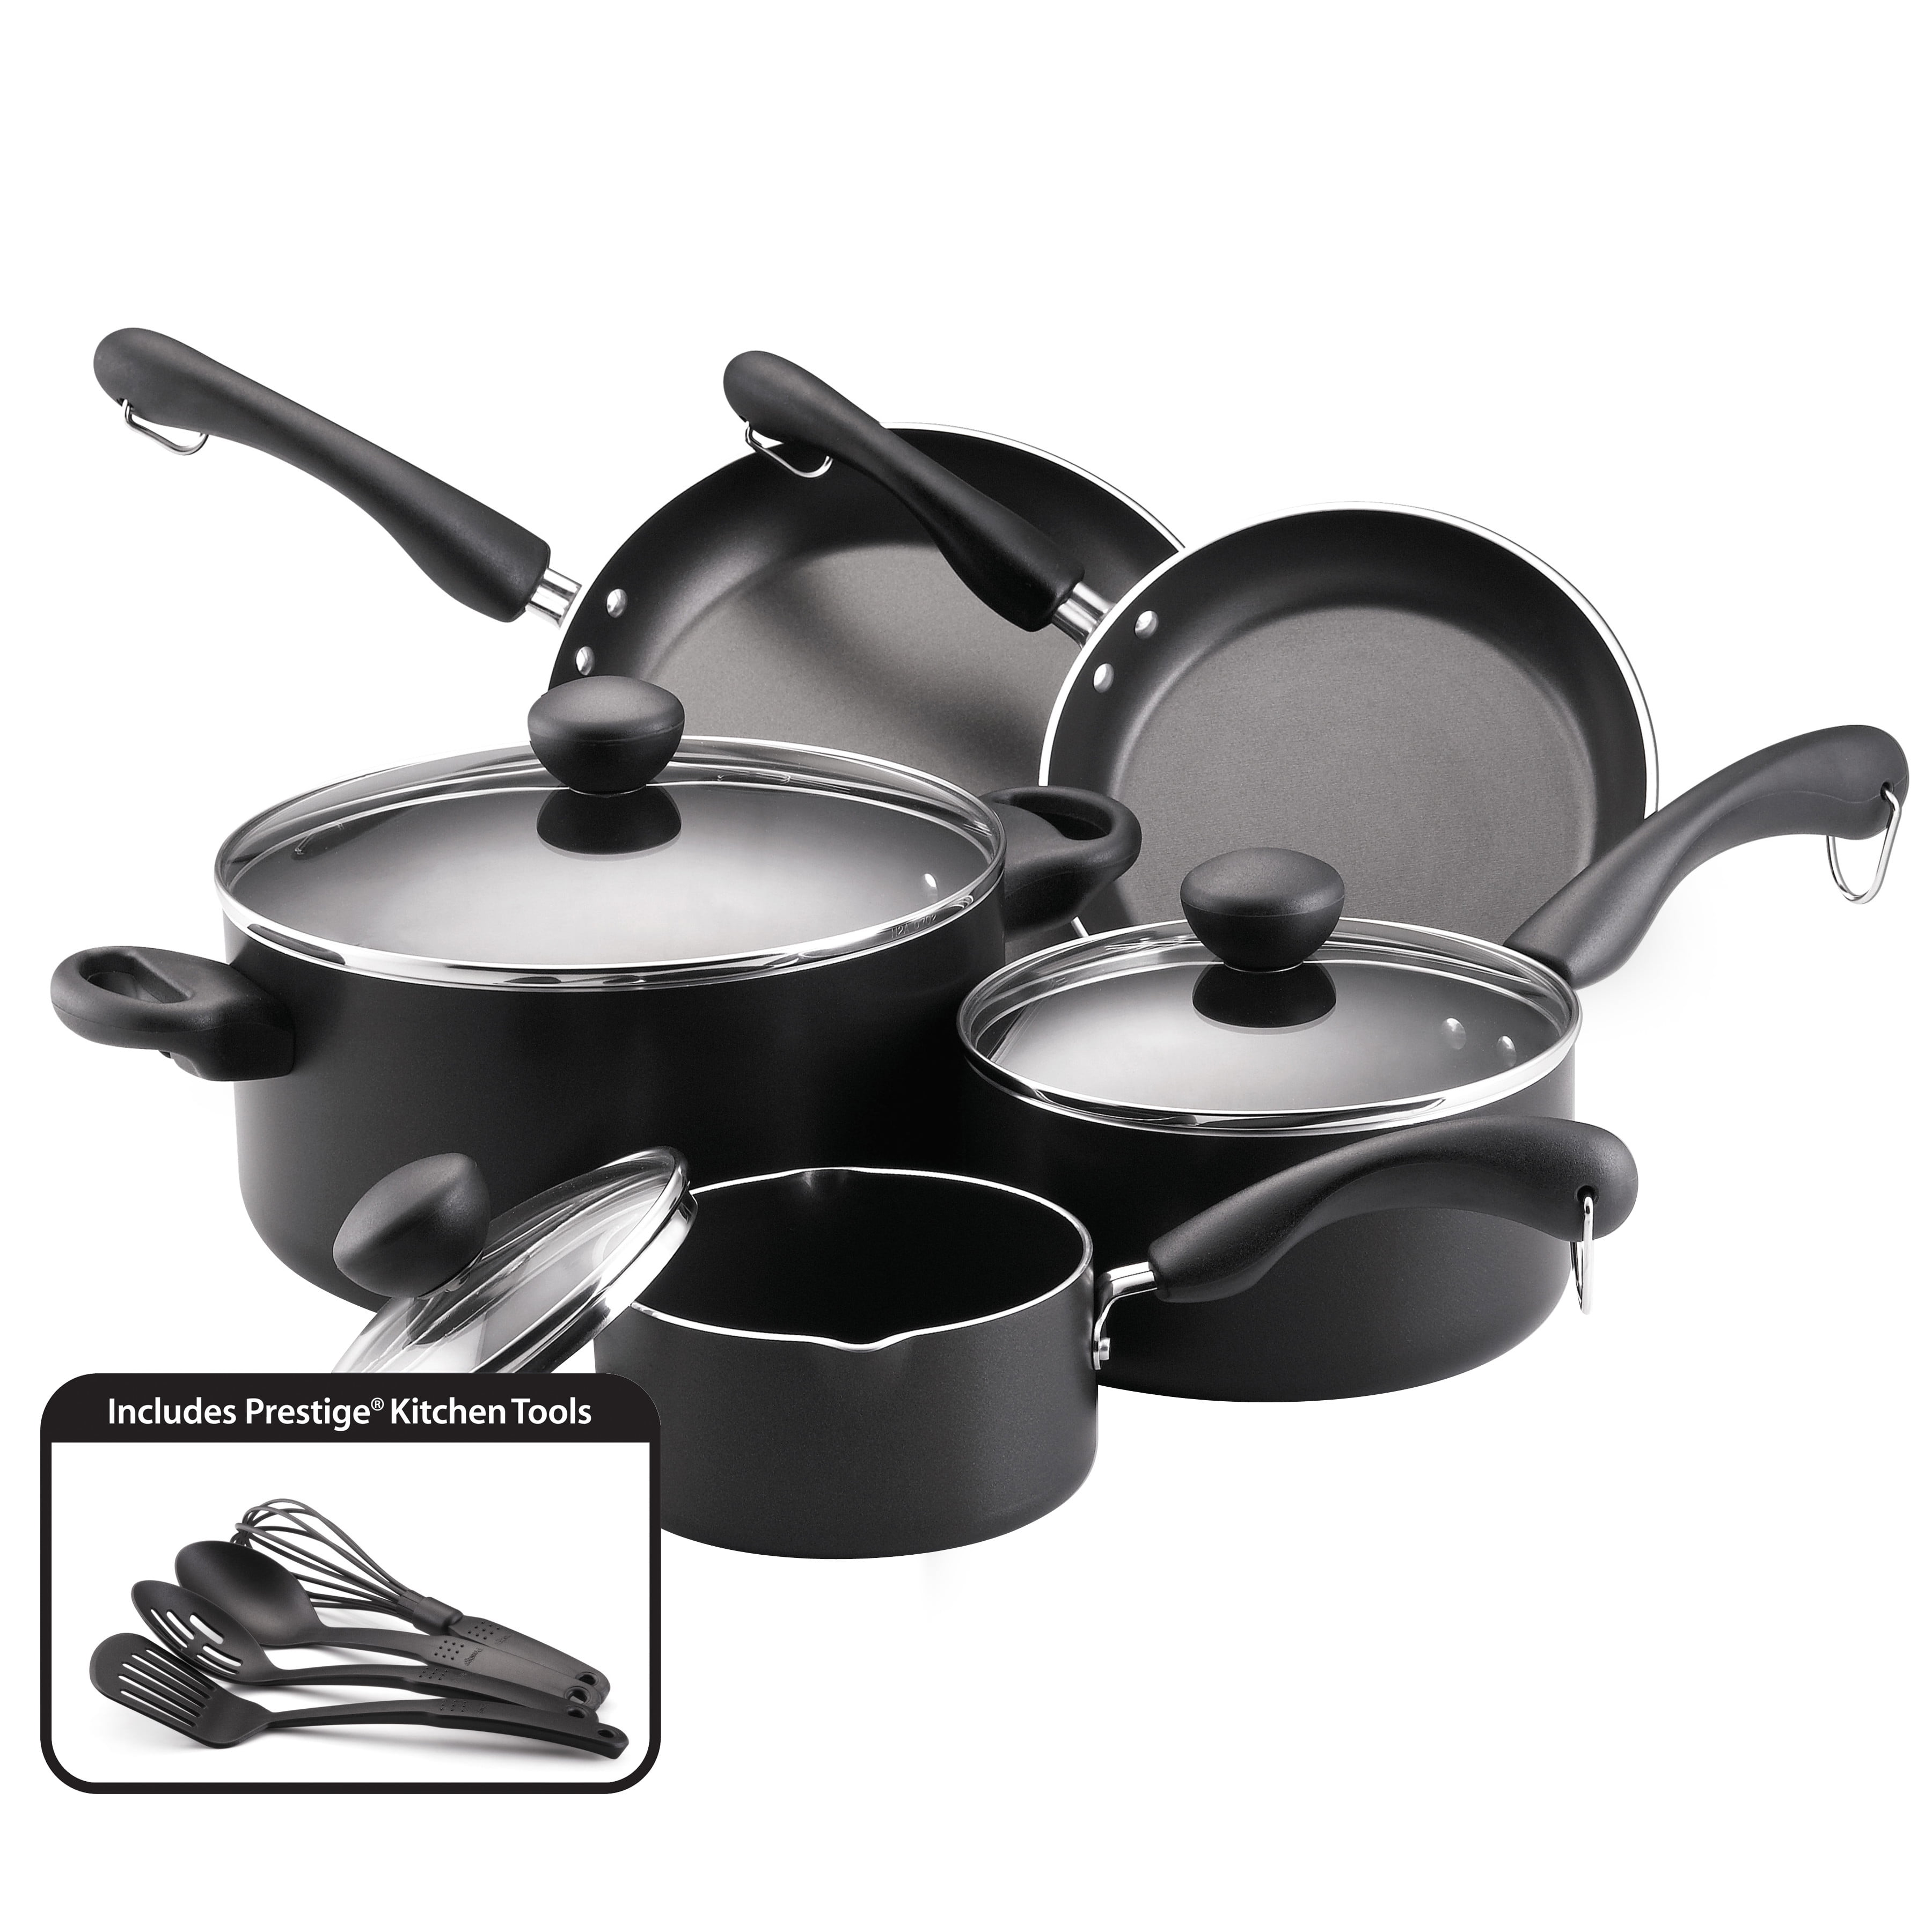 Black Farberware 12-Piece Easy Clean Nonstick Pots and Pans/Cookware Set 